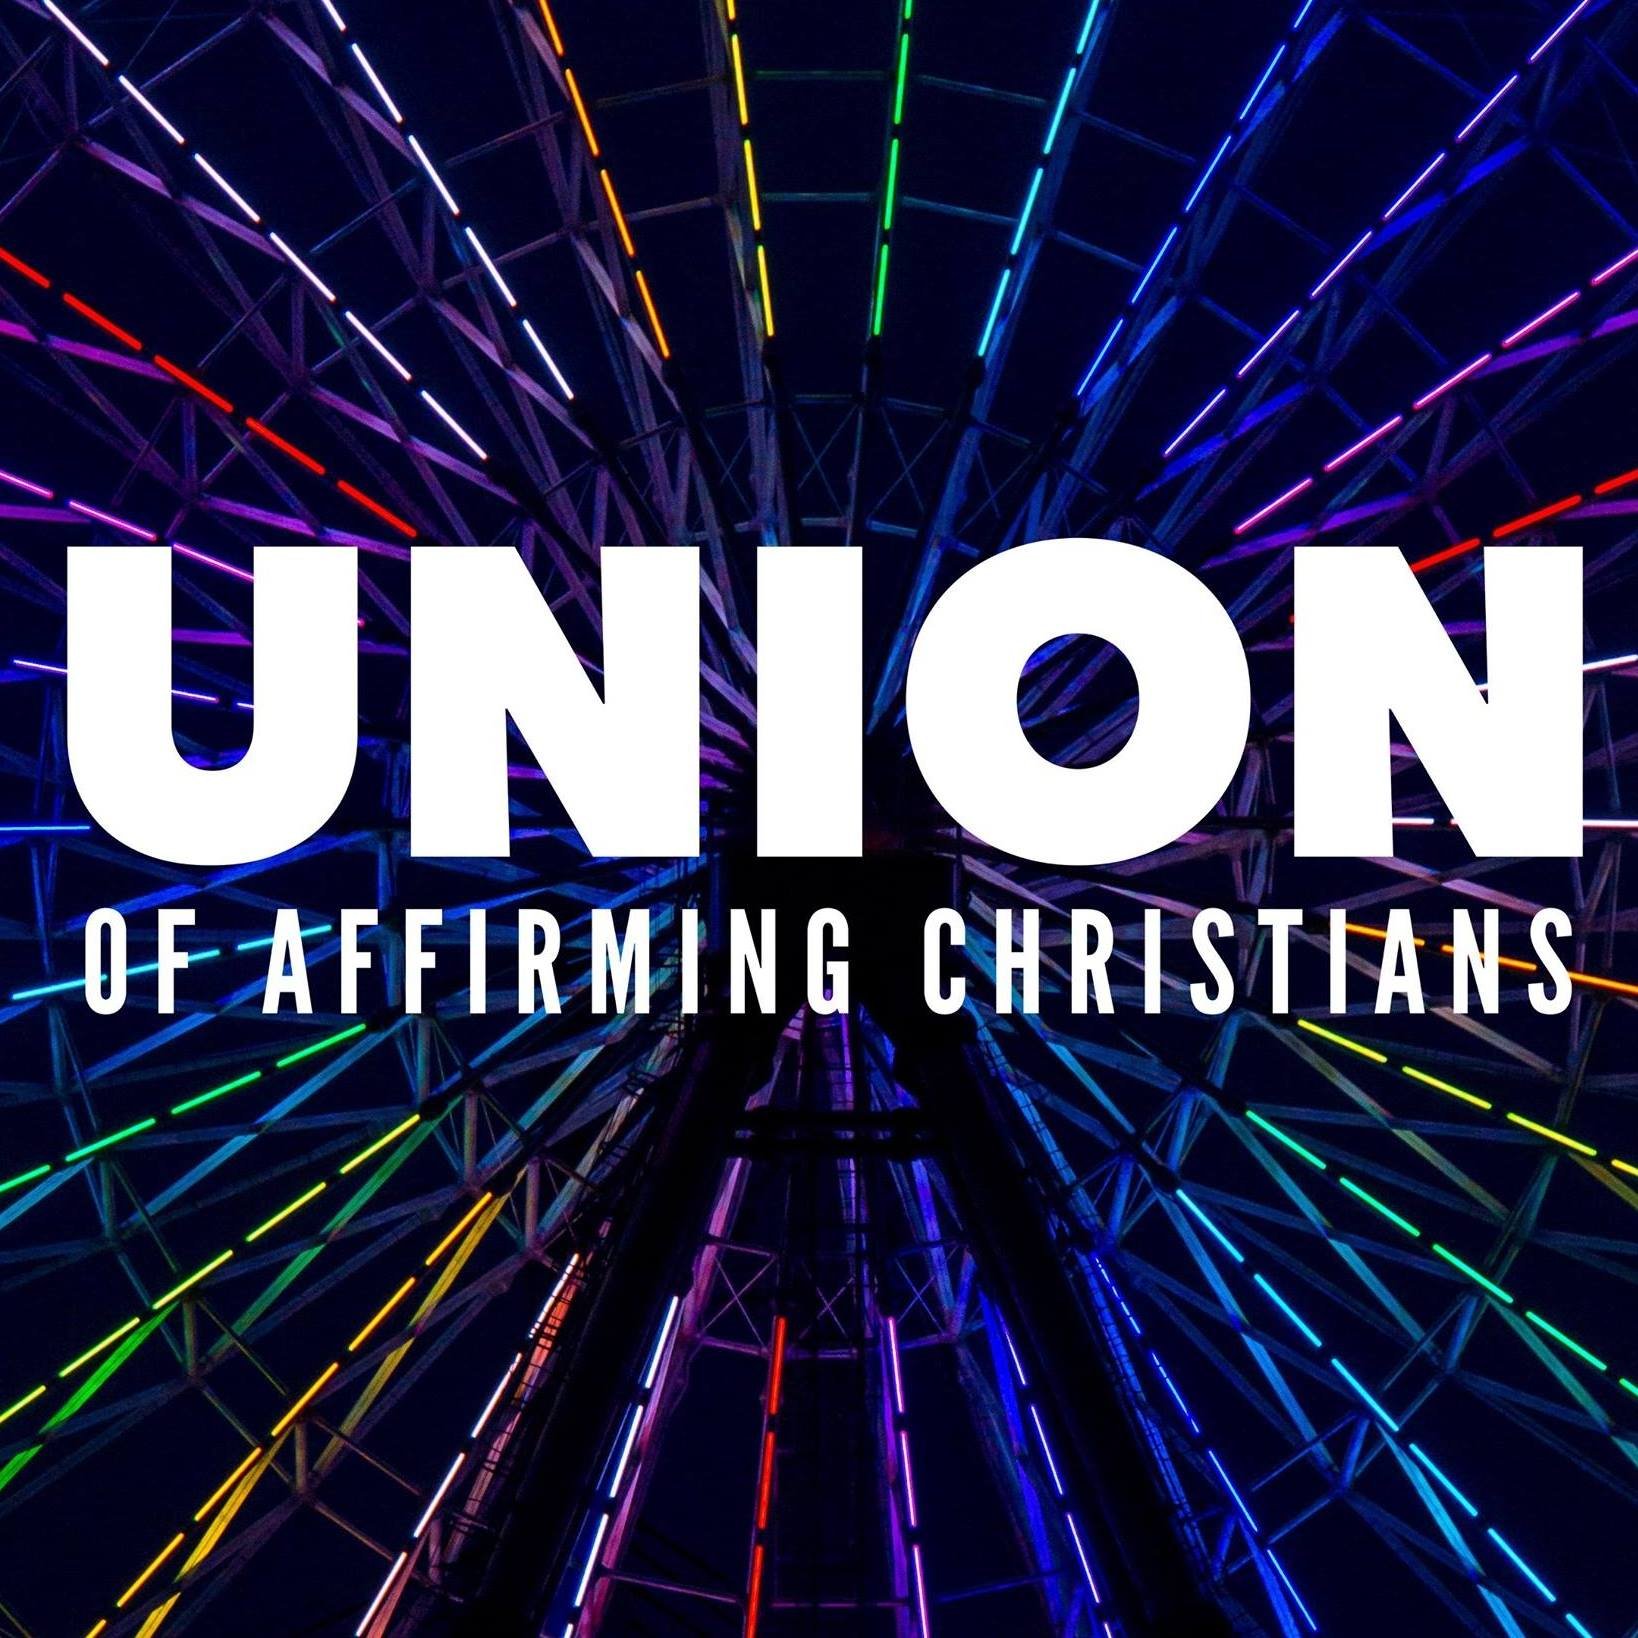 Working to extend God's radical love for all people through advocacy & education in our churches and public square. A partnership with Union Theological Sem.